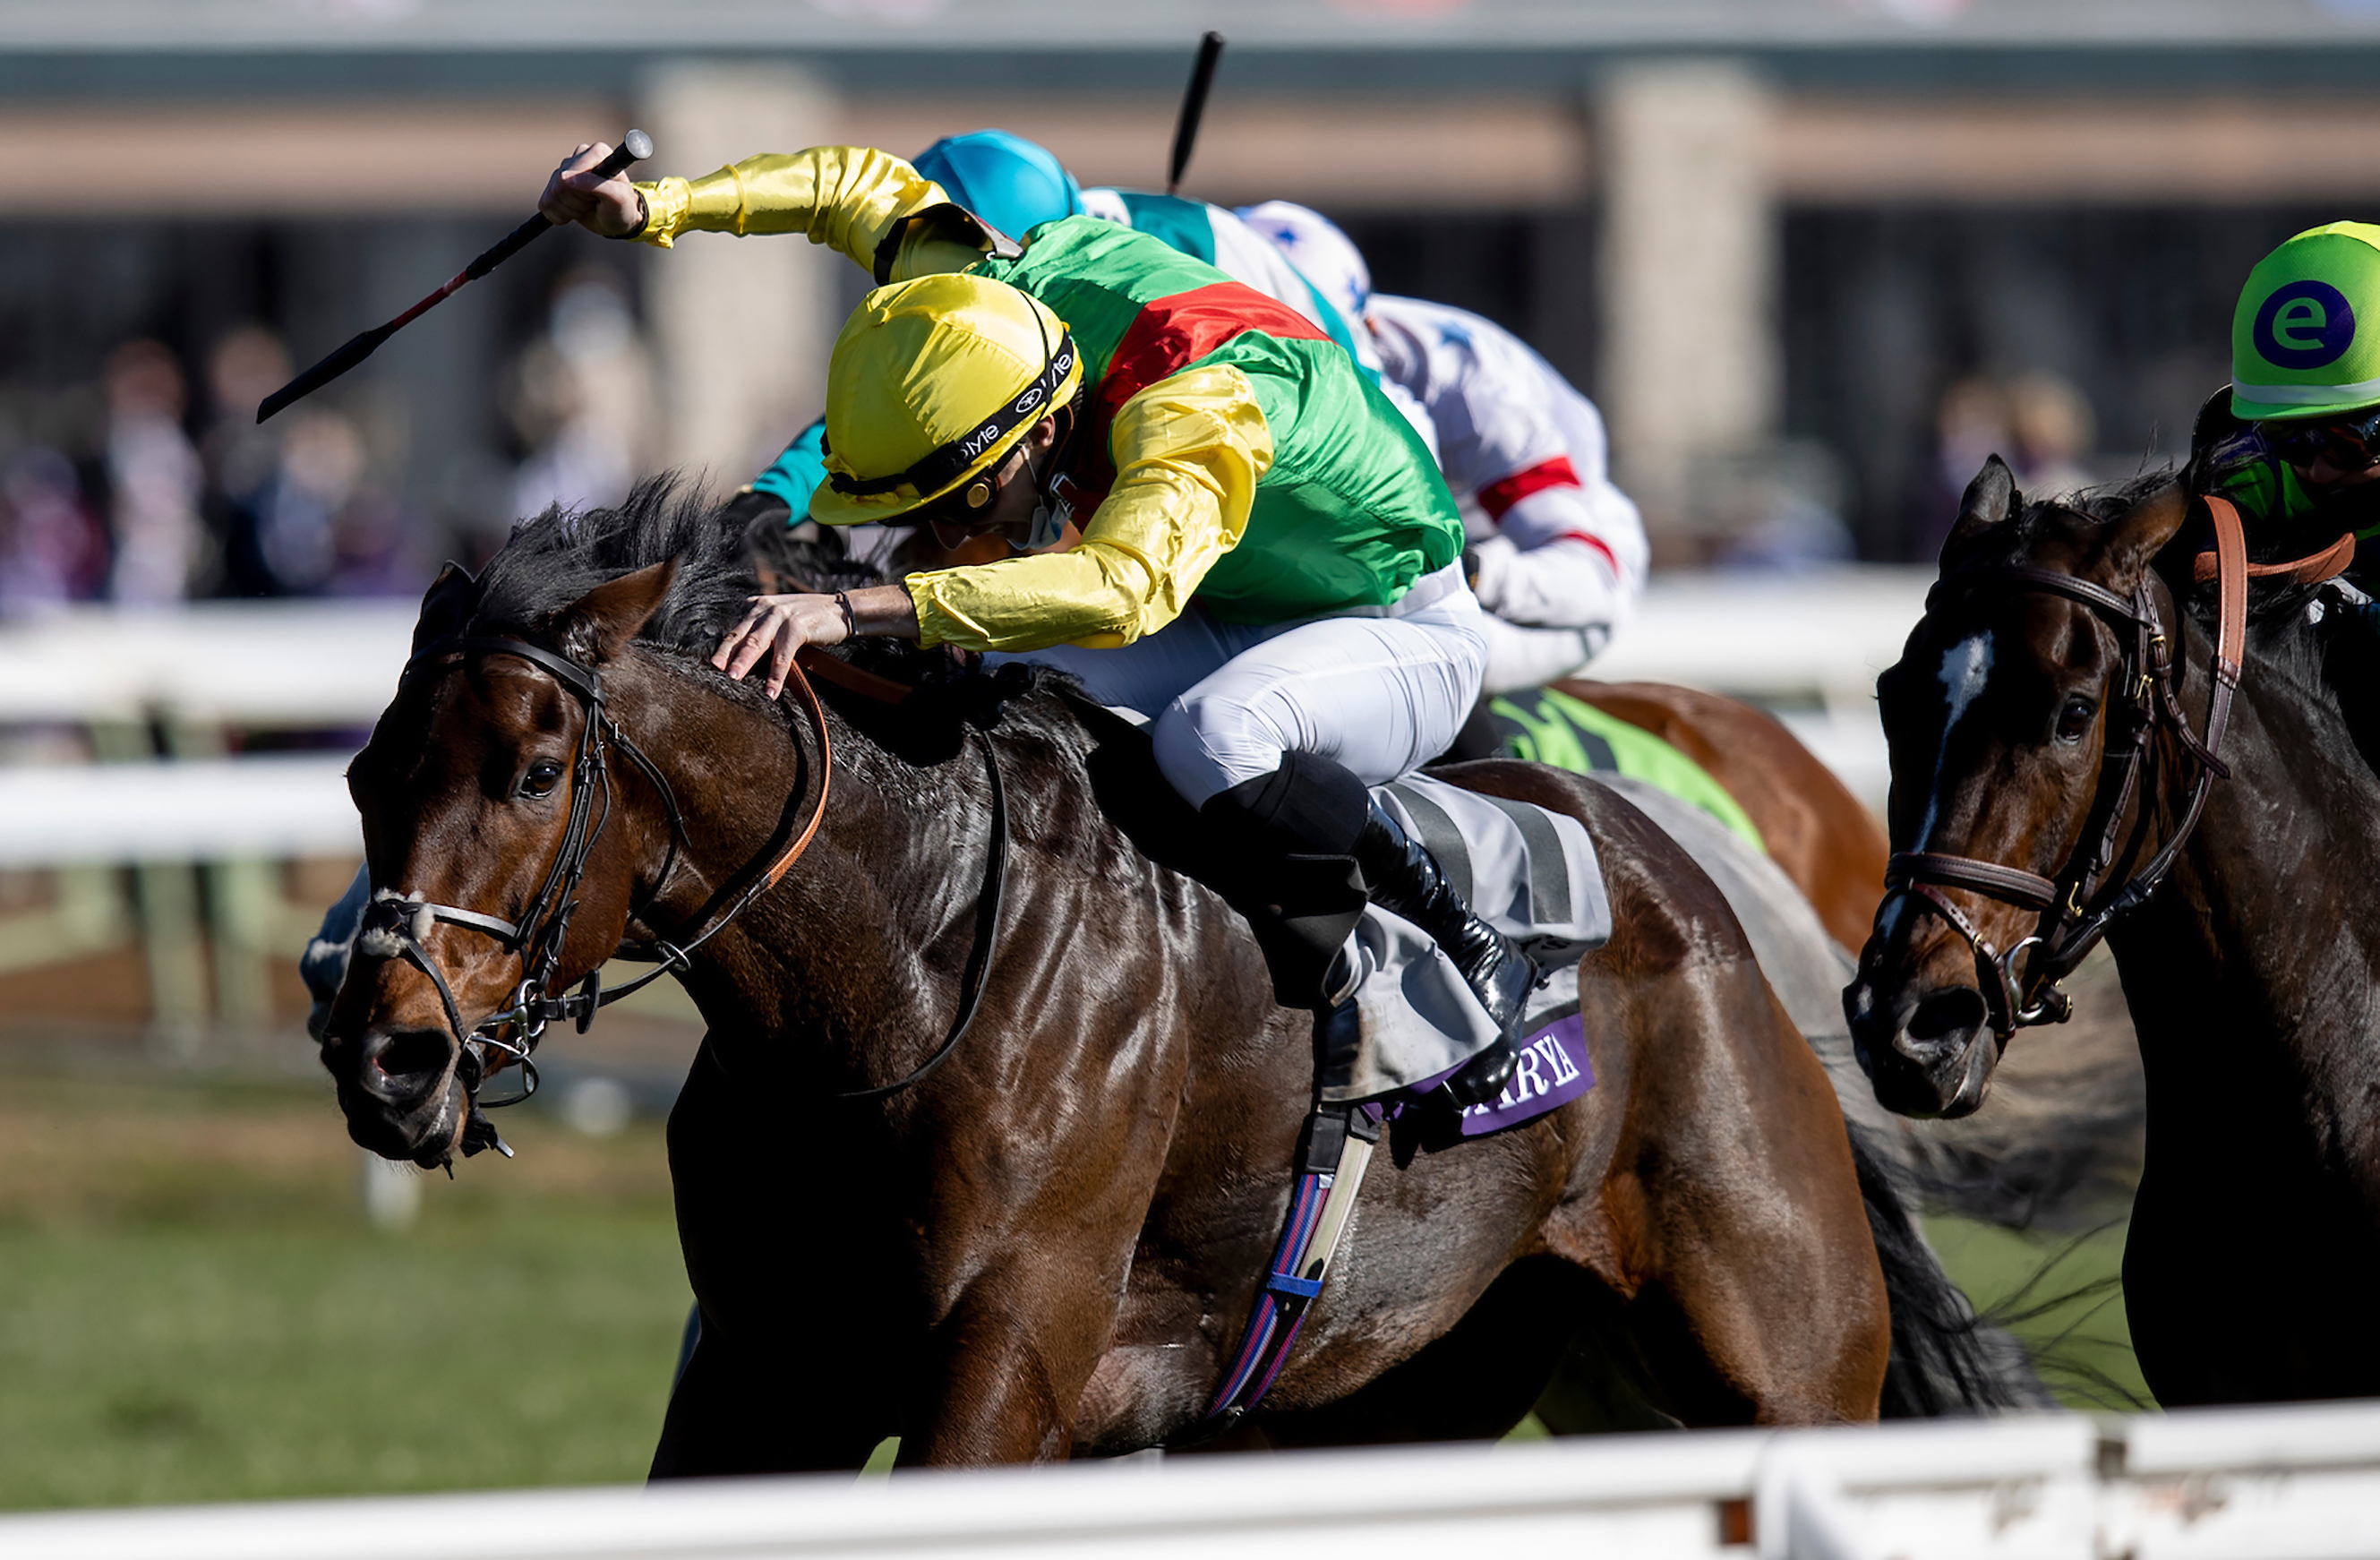 Audarya (Pierre-Charles Boudot) takes the spoils in a driving finish to the Maker’s Mark Filly & Mare Turf at Keeneland to give Newmarket trainer James Fanshawe his first Breeders’ Cup winner with his first Breeders’ Cup runner. Photo: Alex Evers/Breeders’ Cup/Eclipse Sportswire/CSM